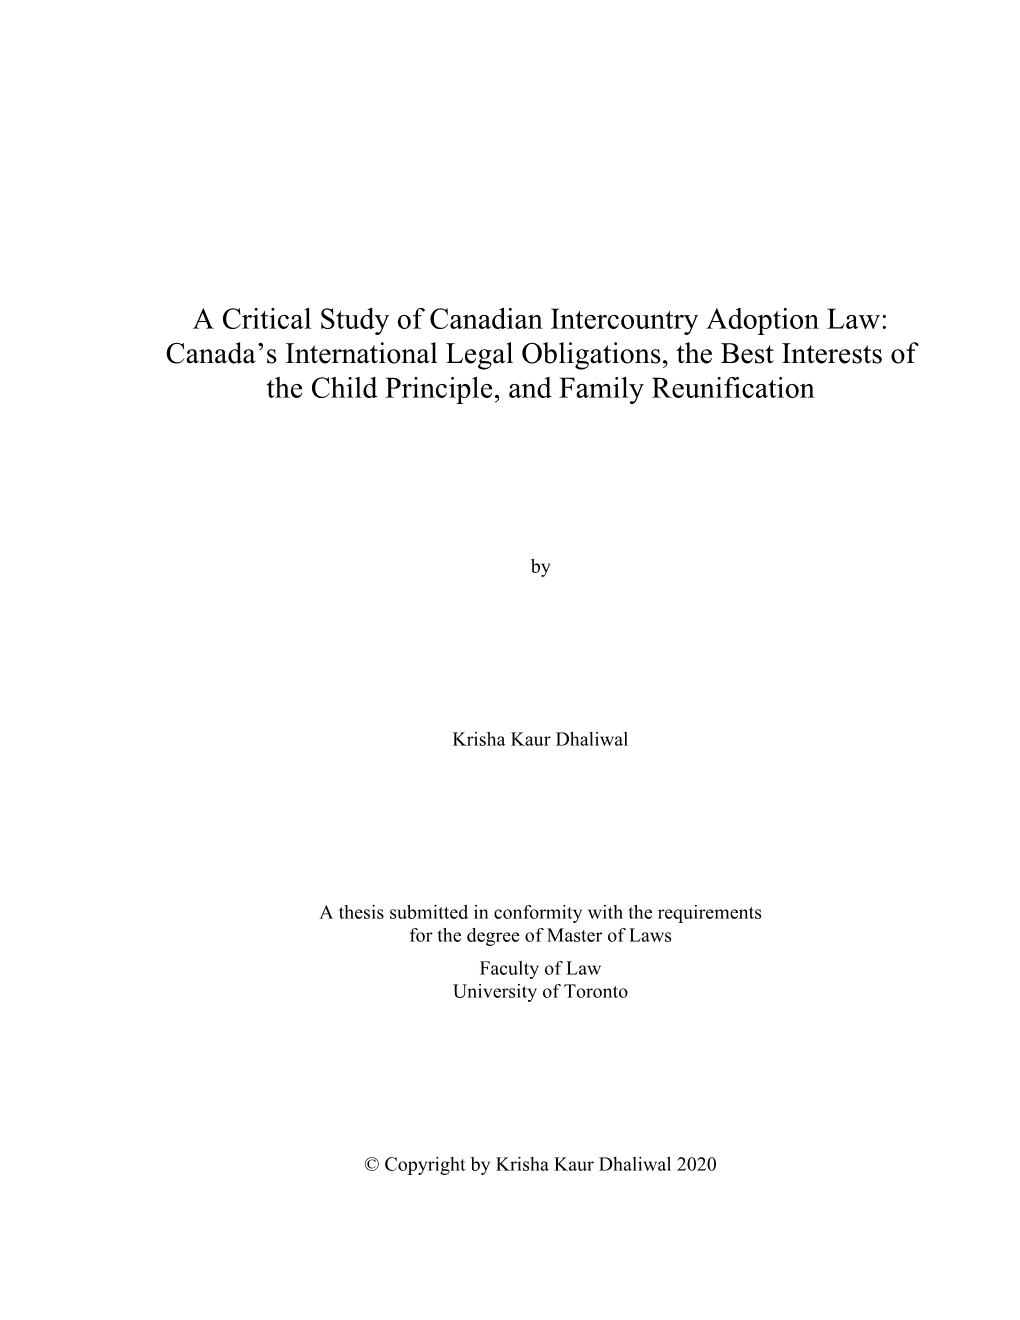 A Critical Study of Canadian Intercountry Adoption Law: Canada’S International Legal Obligations, the Best Interests of the Child Principle, and Family Reunification